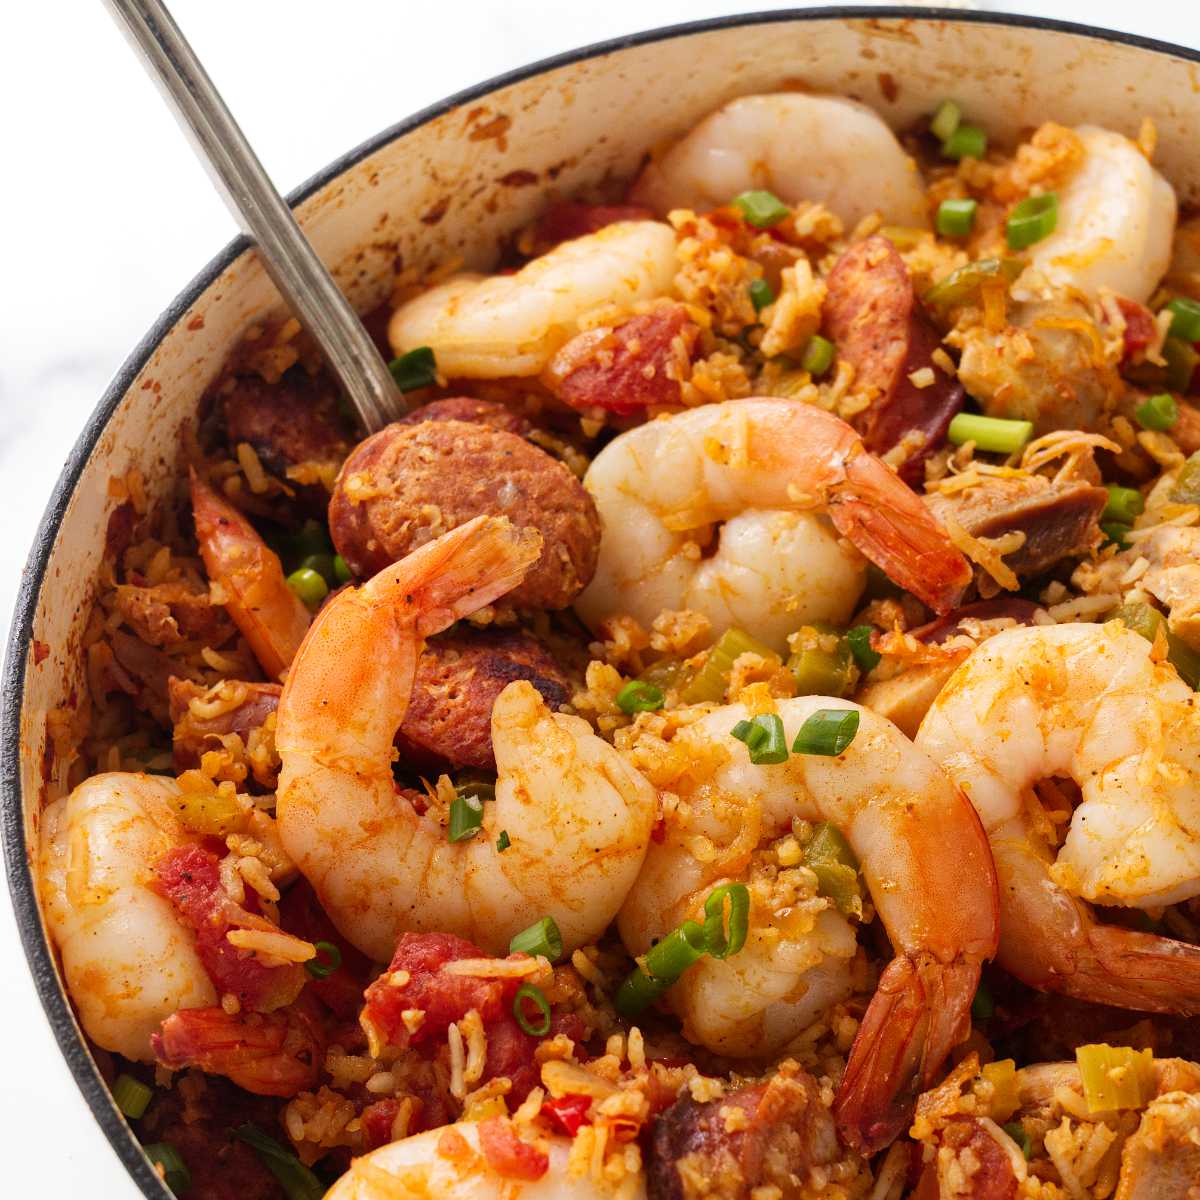 A traditional jambalaya recipe in a skillet.